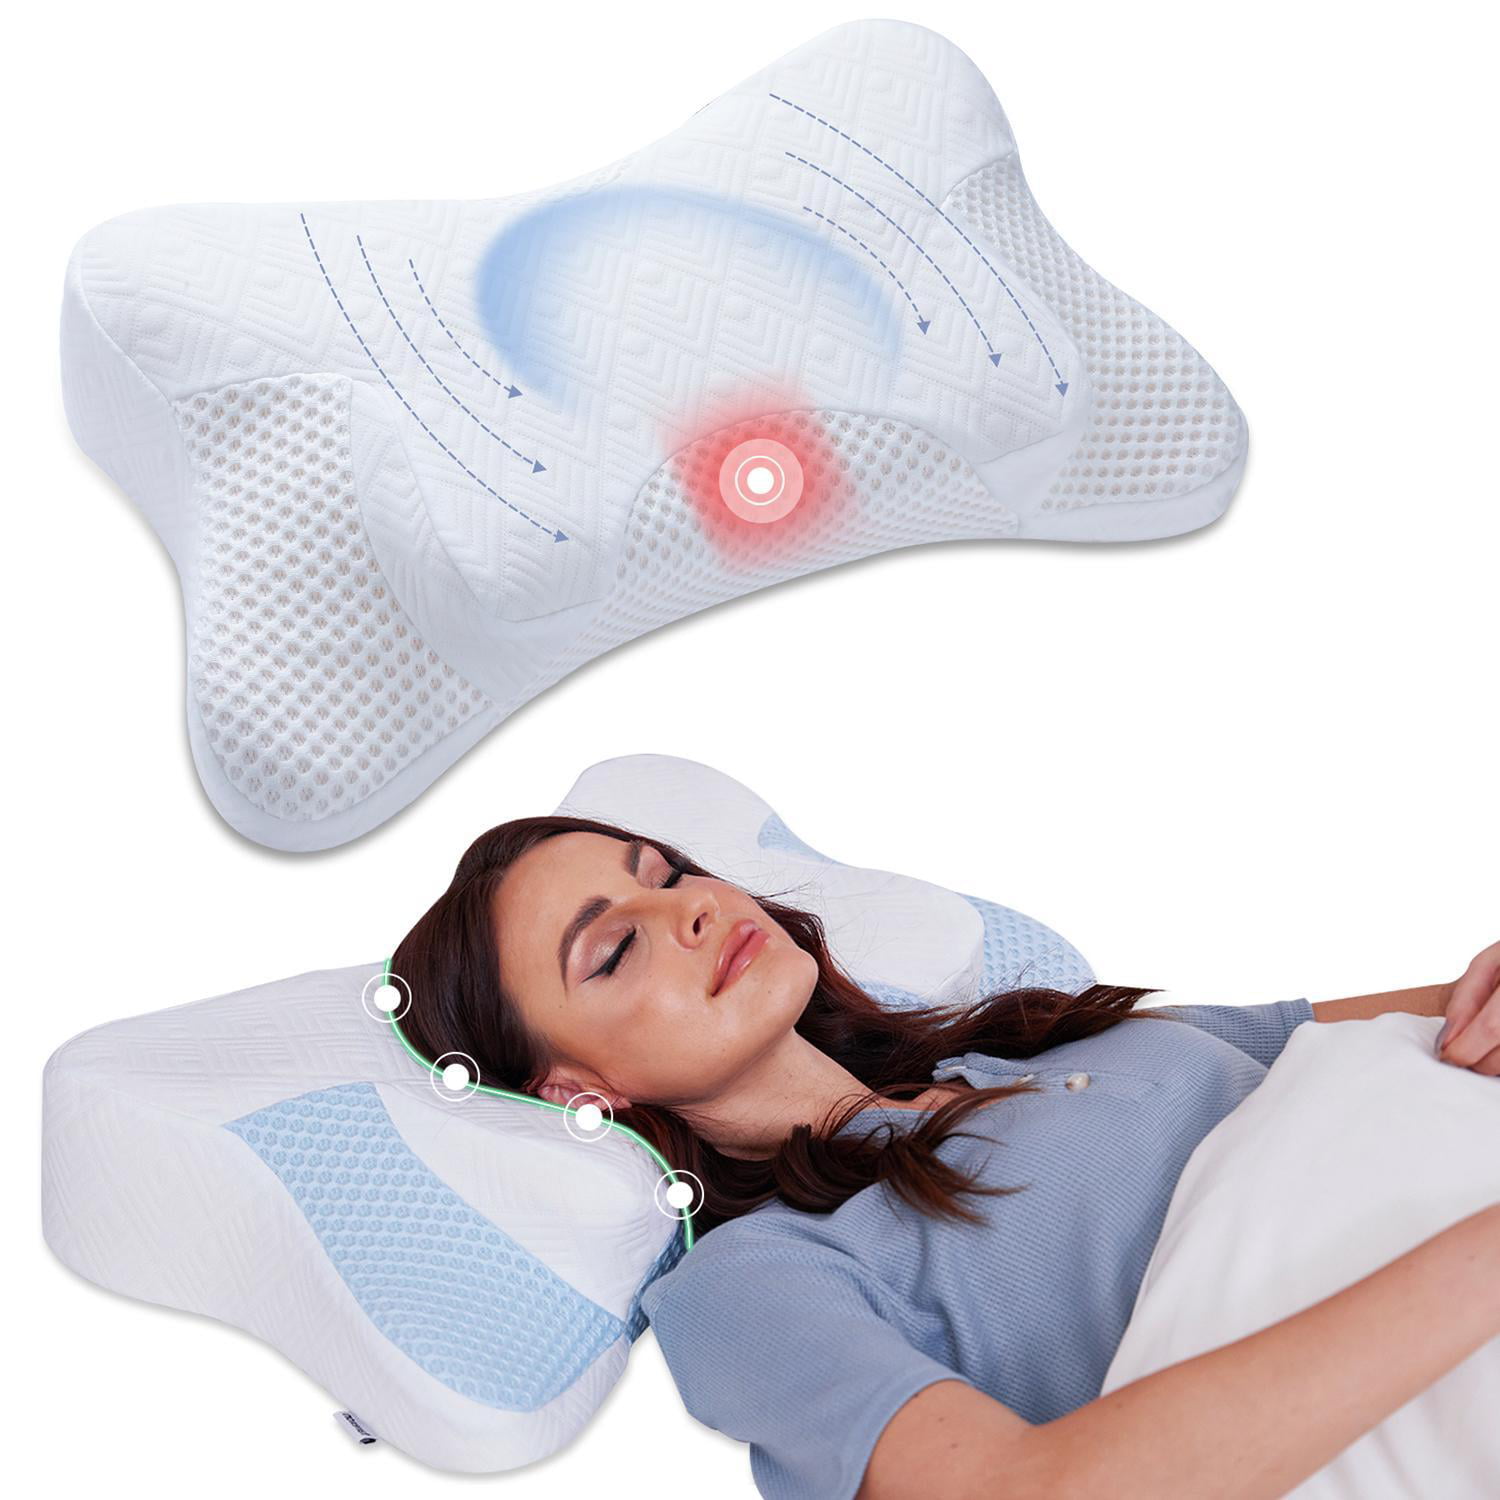 Therapeutica Orthopedic Sleeping Pillow Helps Spinal Alignment Neck Head Support 